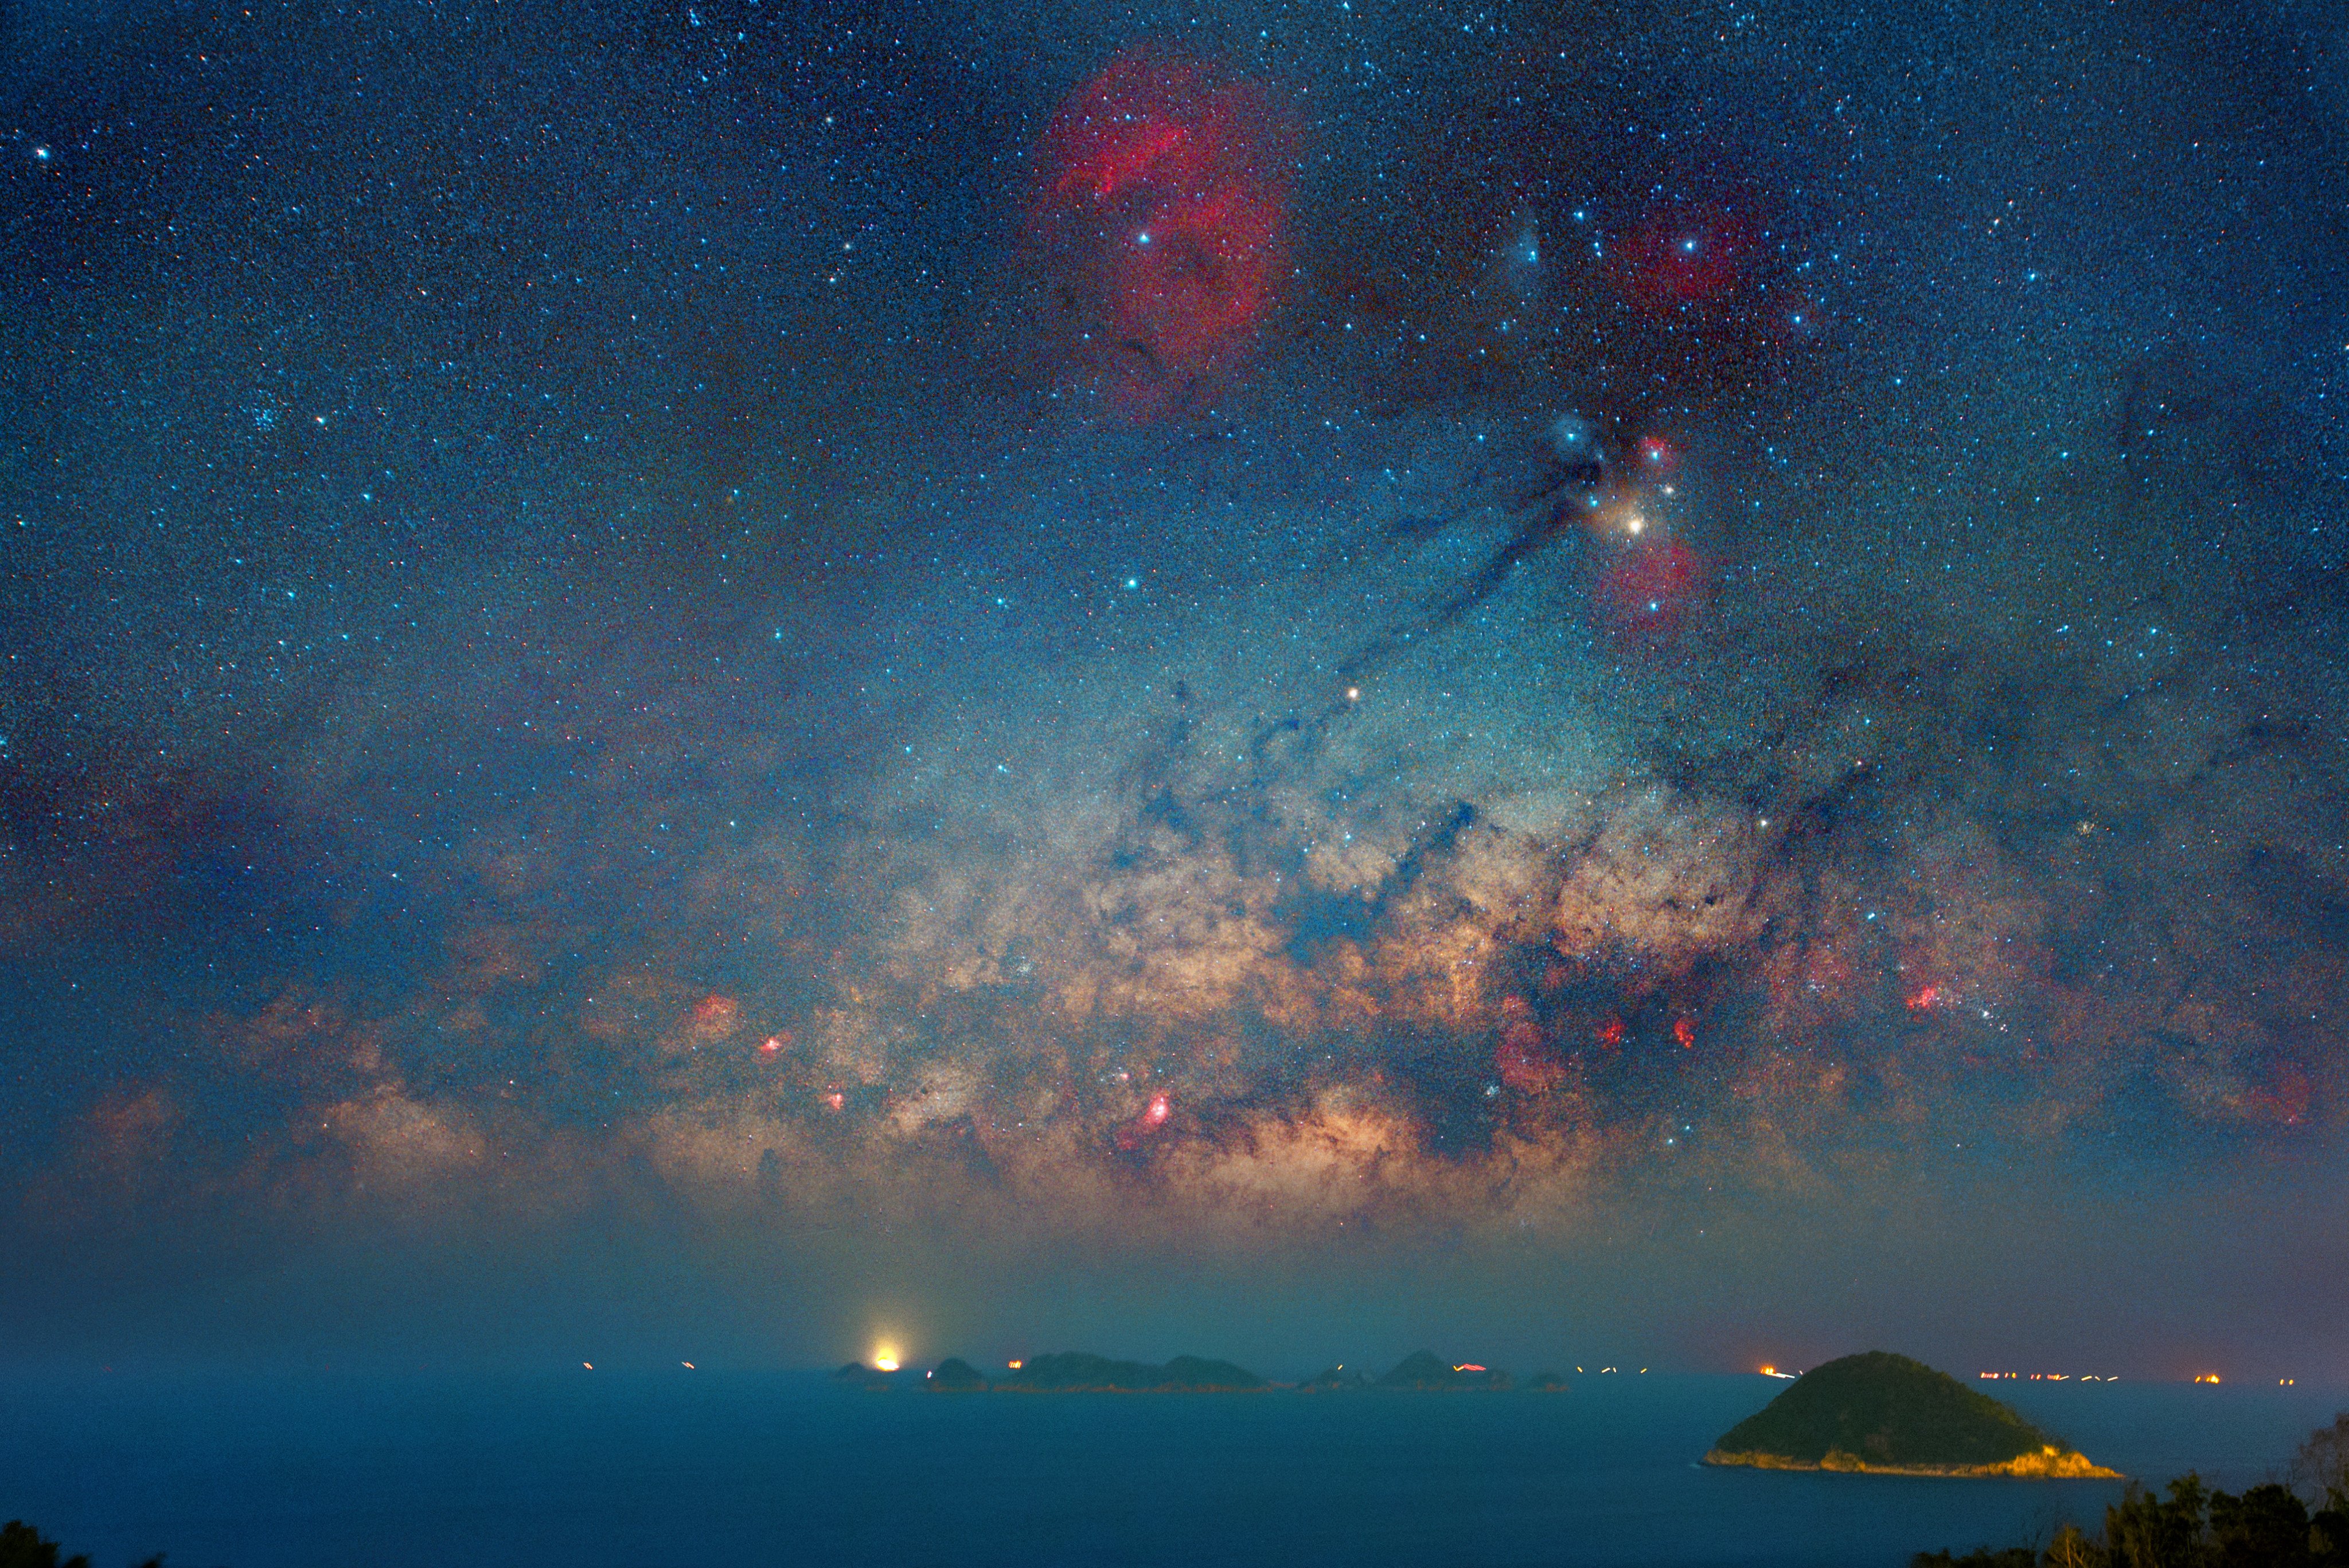 People keen to photograph the sky at night are likely to see many more stars from vantage points overlooking areas such as Clearwater Bay (above) during the winter months. Photo: Vincent Cheng